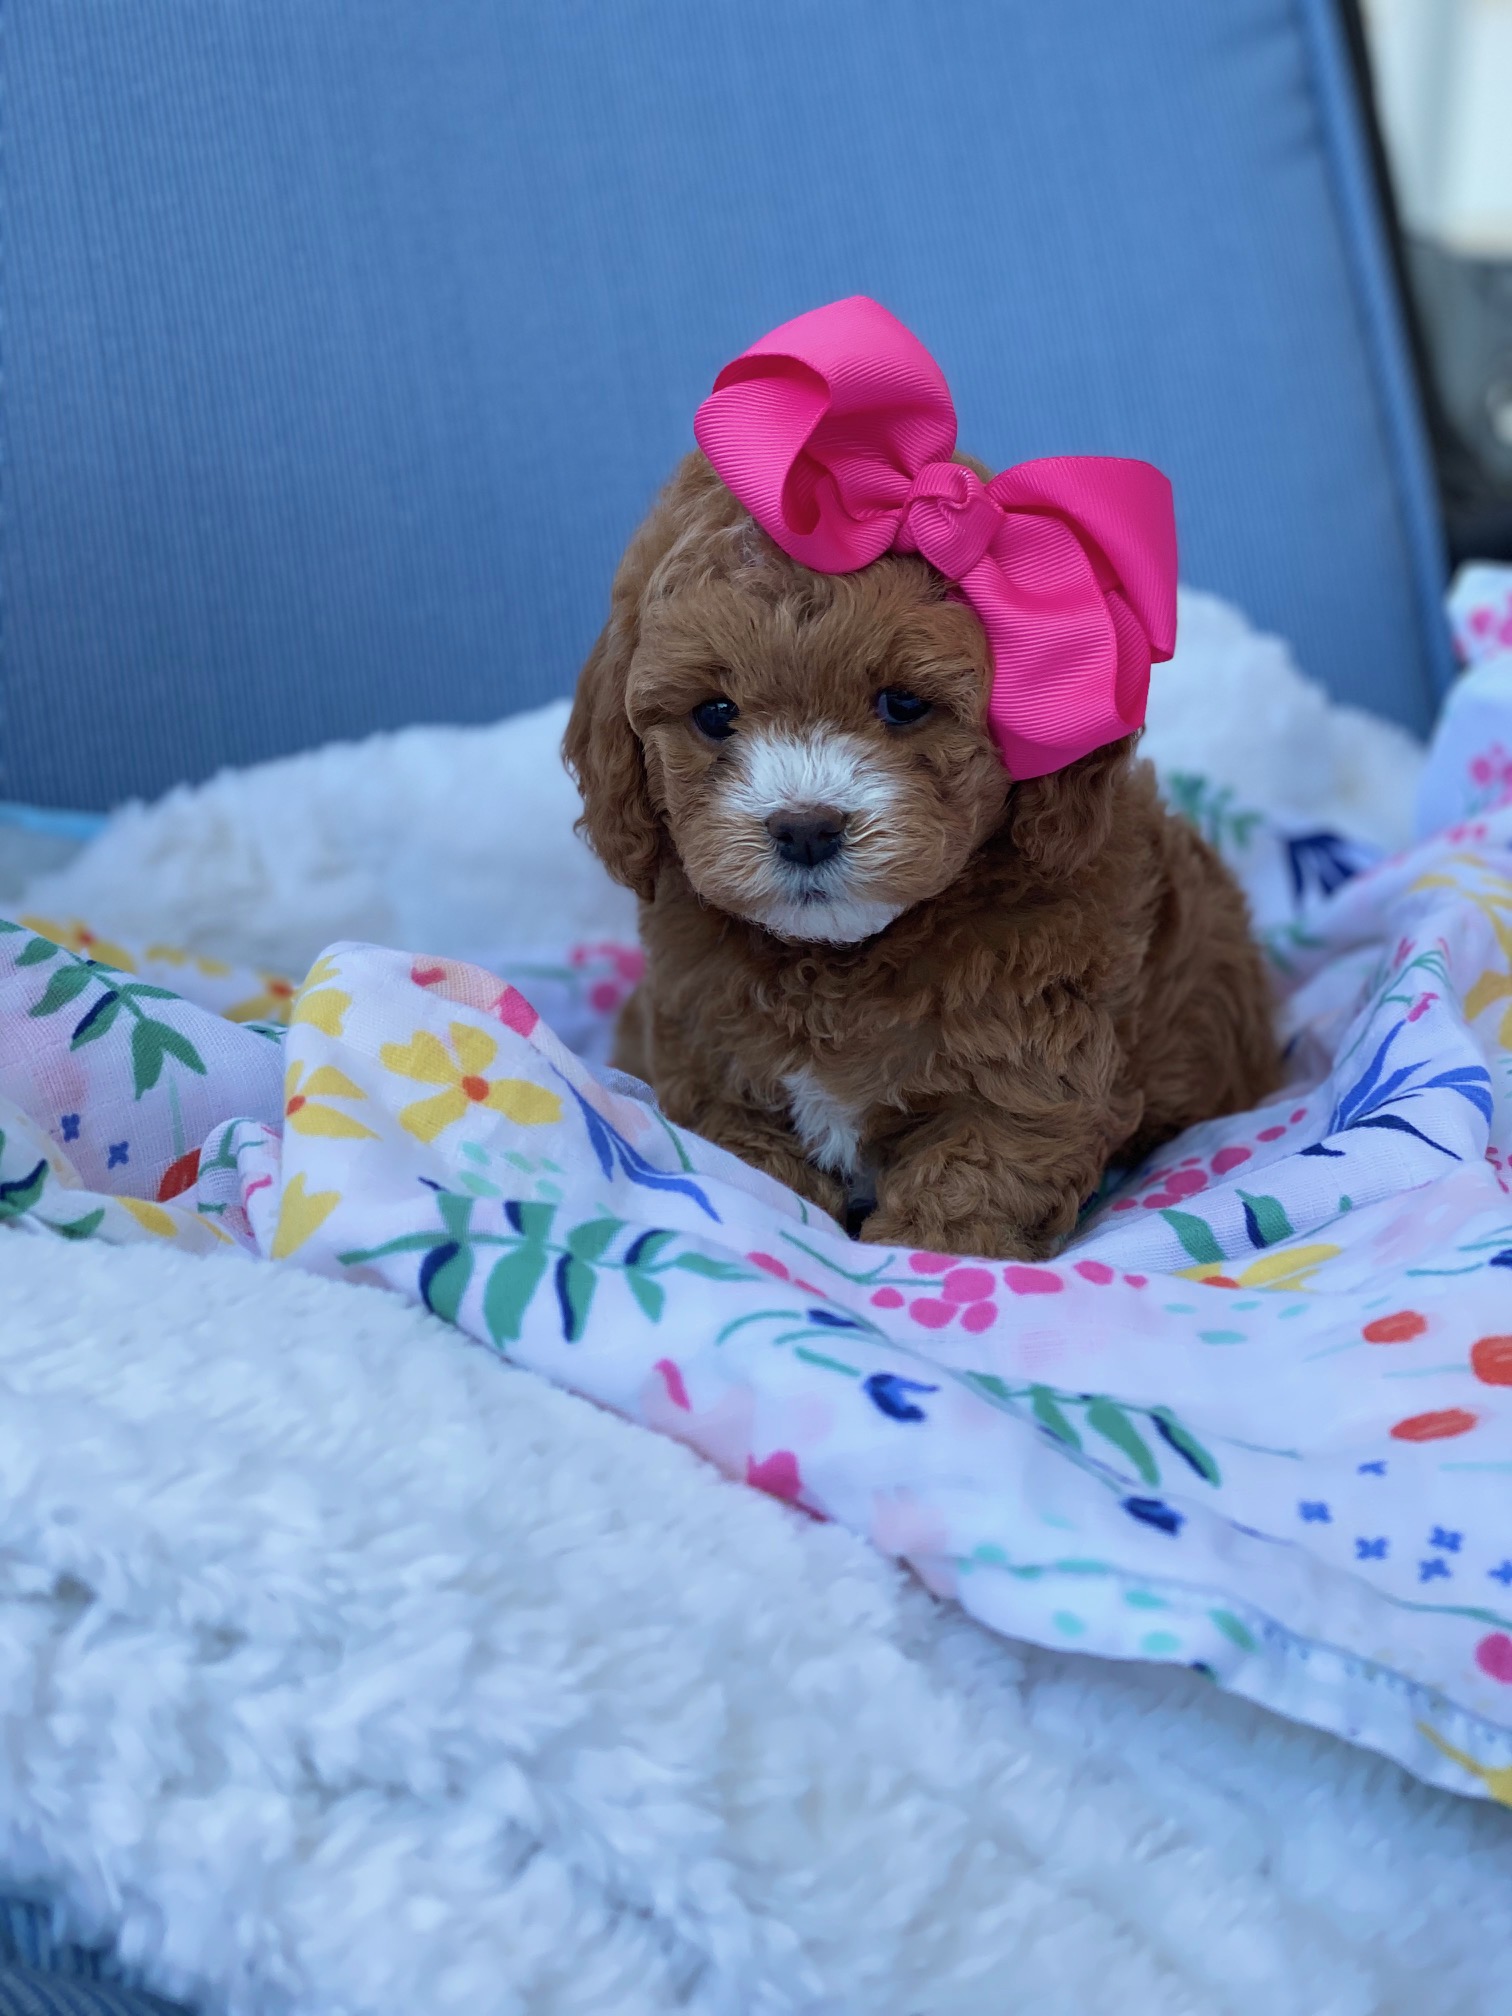 A small brown puppy with a pink bow sits gracefully on a soft blanket, exuding an adorable charm.